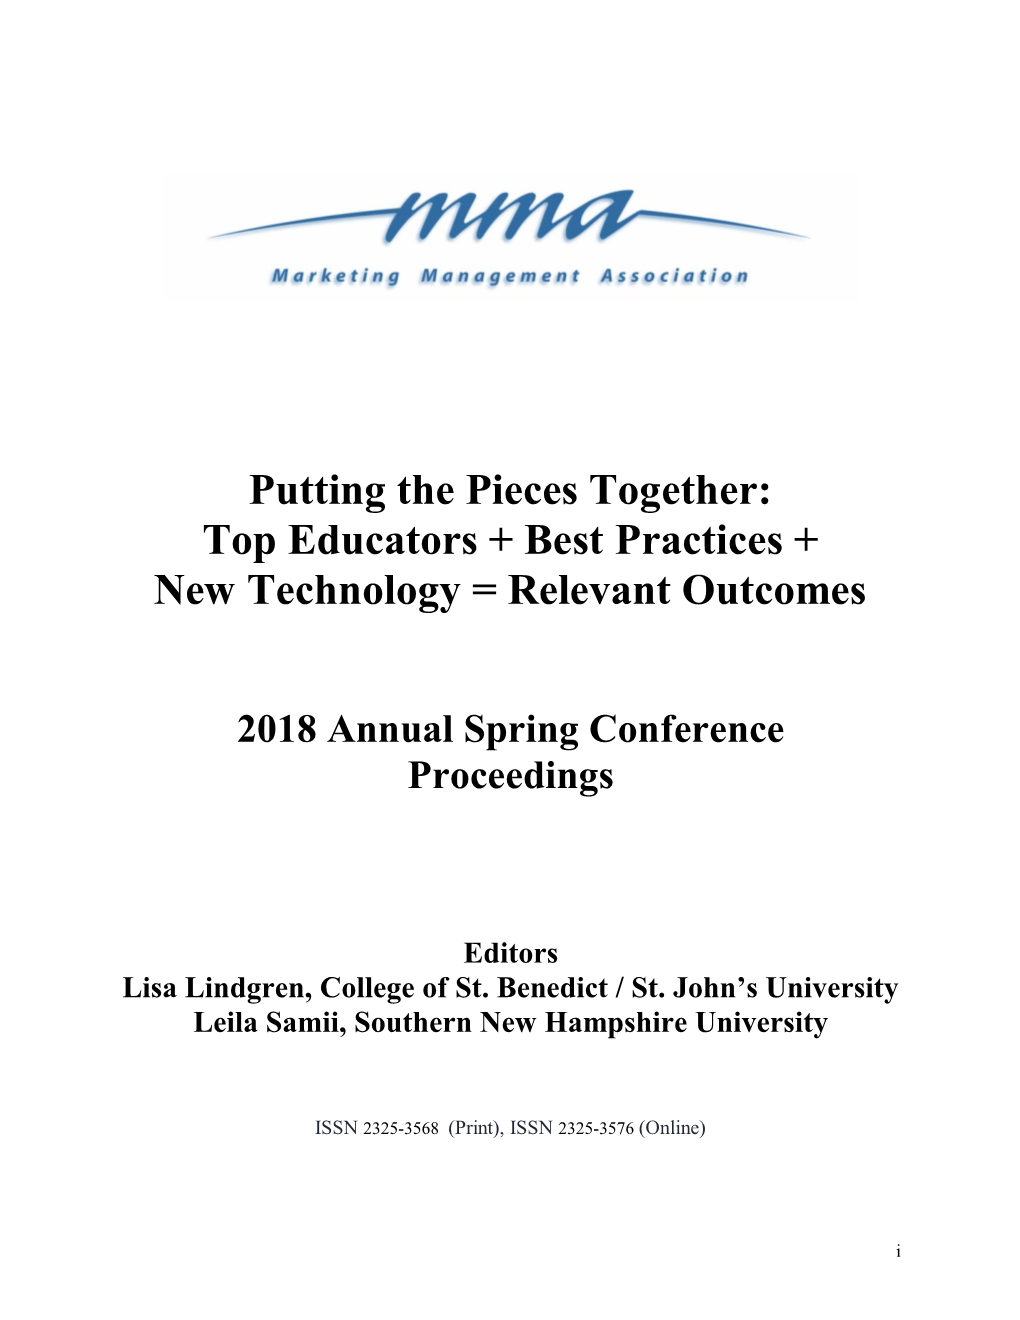 Putting the Pieces Together: Top Educators + Best Practices + New Technology = Relevant Outcomes